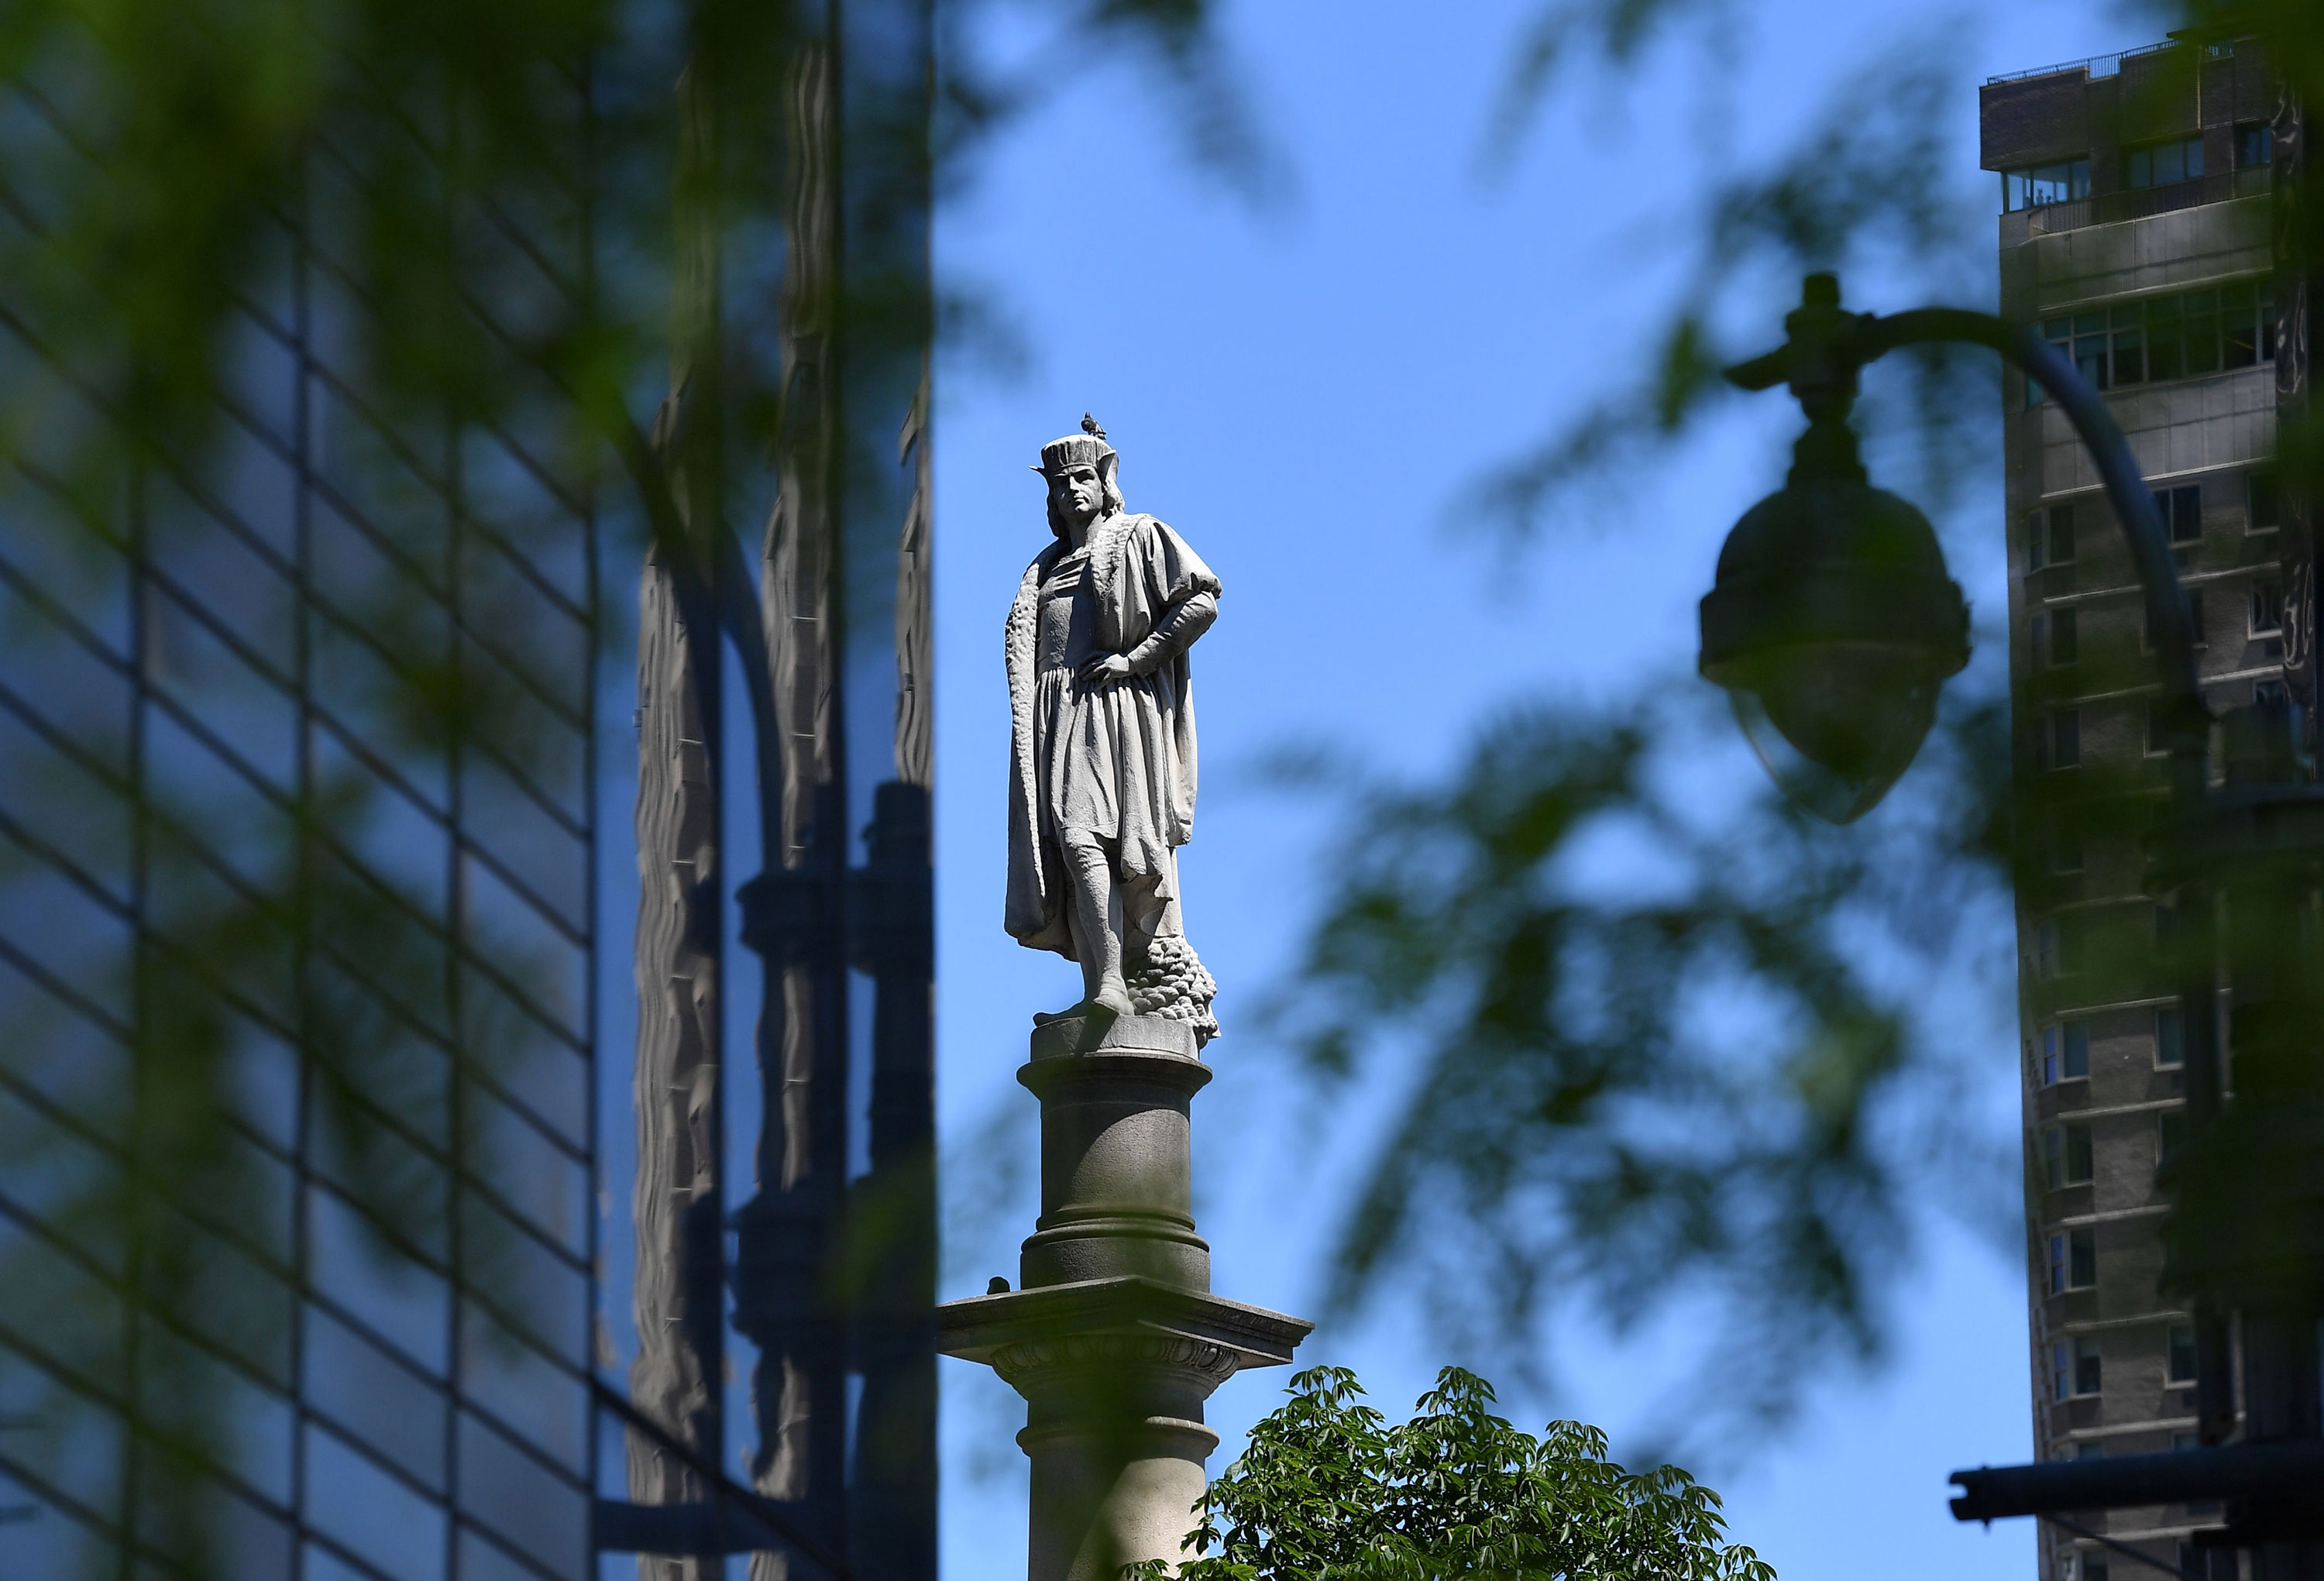 Christopher Columbus statue appears in Columbus Circle near Central Park in New York on June 12.